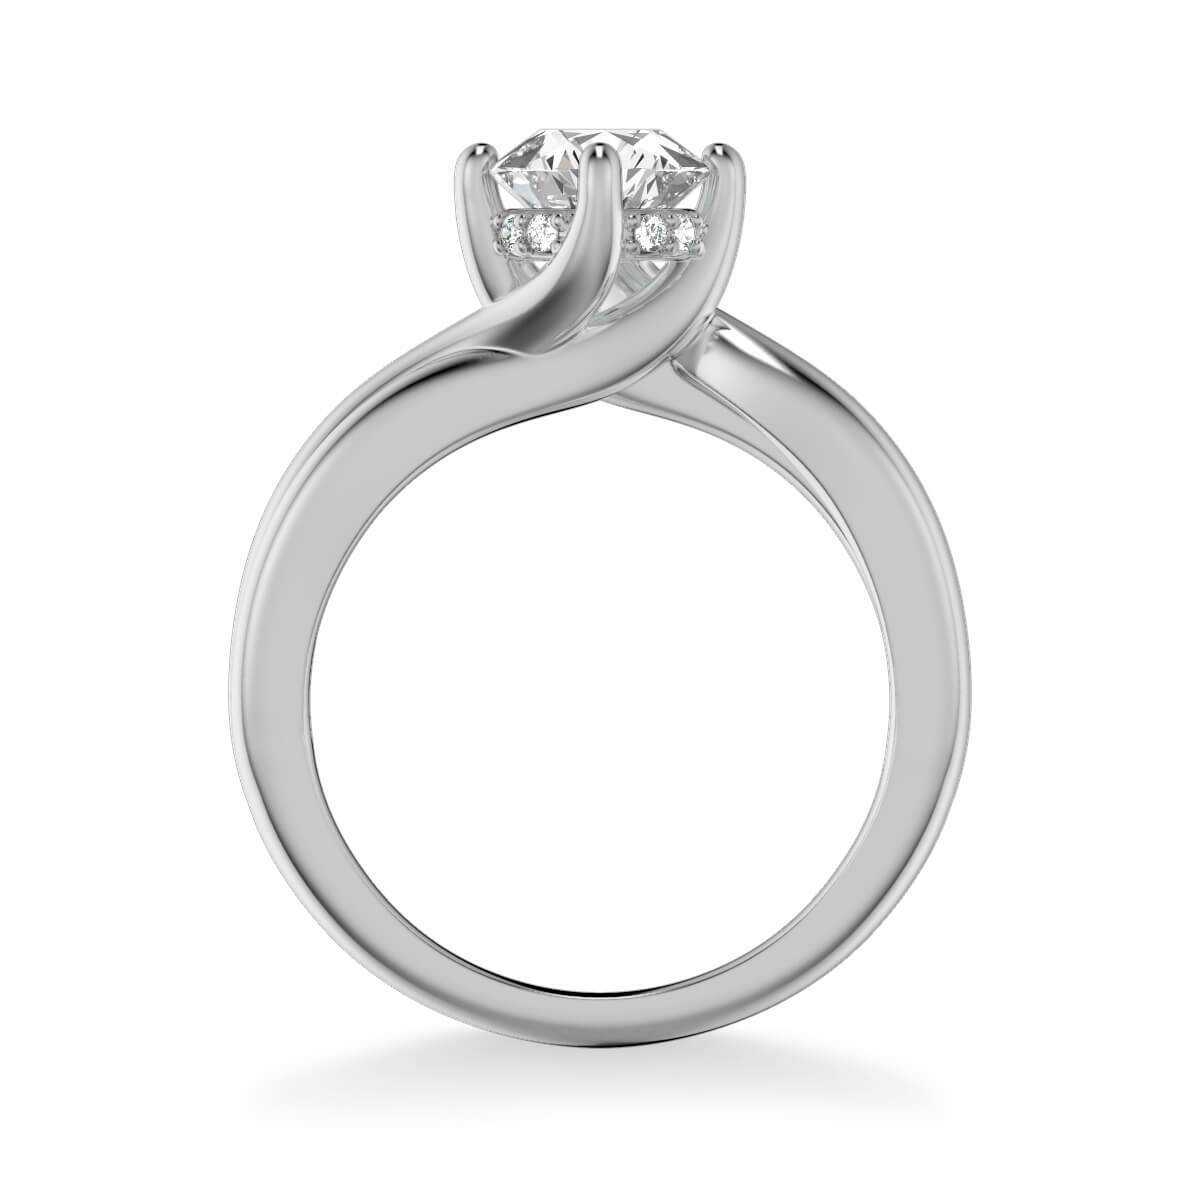 Whitney Contemporary Solitaire Twist Diamond Engagement Ring